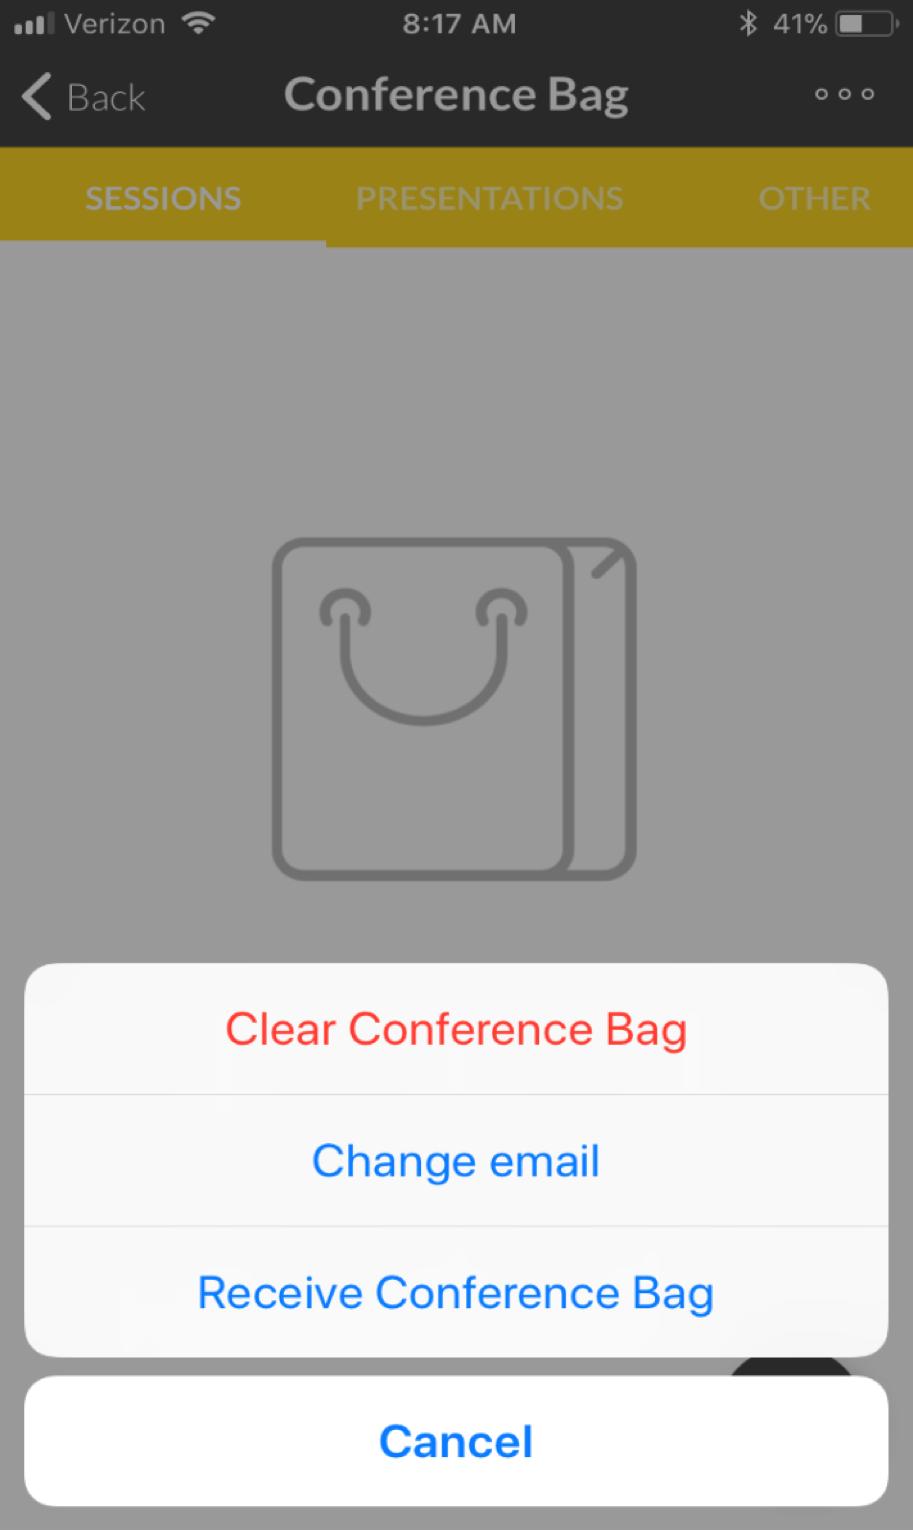 The attendants information will store automatically in your conference bag module.